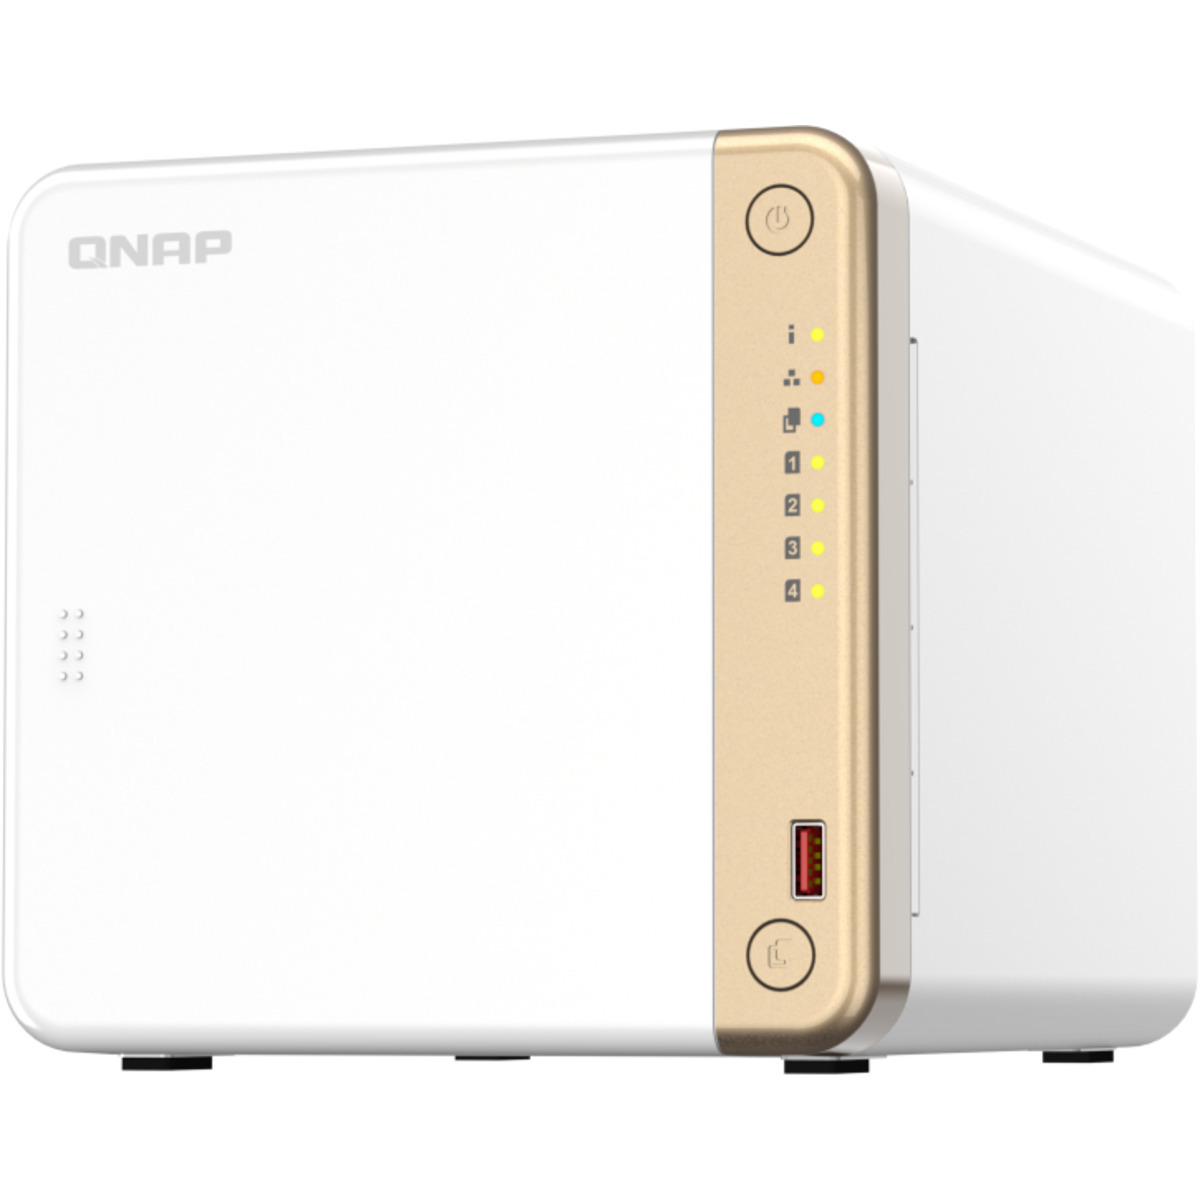 QNAP TS-462 30tb 4-Bay Desktop Multimedia / Power User / Business NAS - Network Attached Storage Device 3x10tb Seagate IronWolf Pro ST10000NT001 3.5 7200rpm SATA 6Gb/s HDD NAS Class Drives Installed - Burn-In Tested - ON SALE TS-462